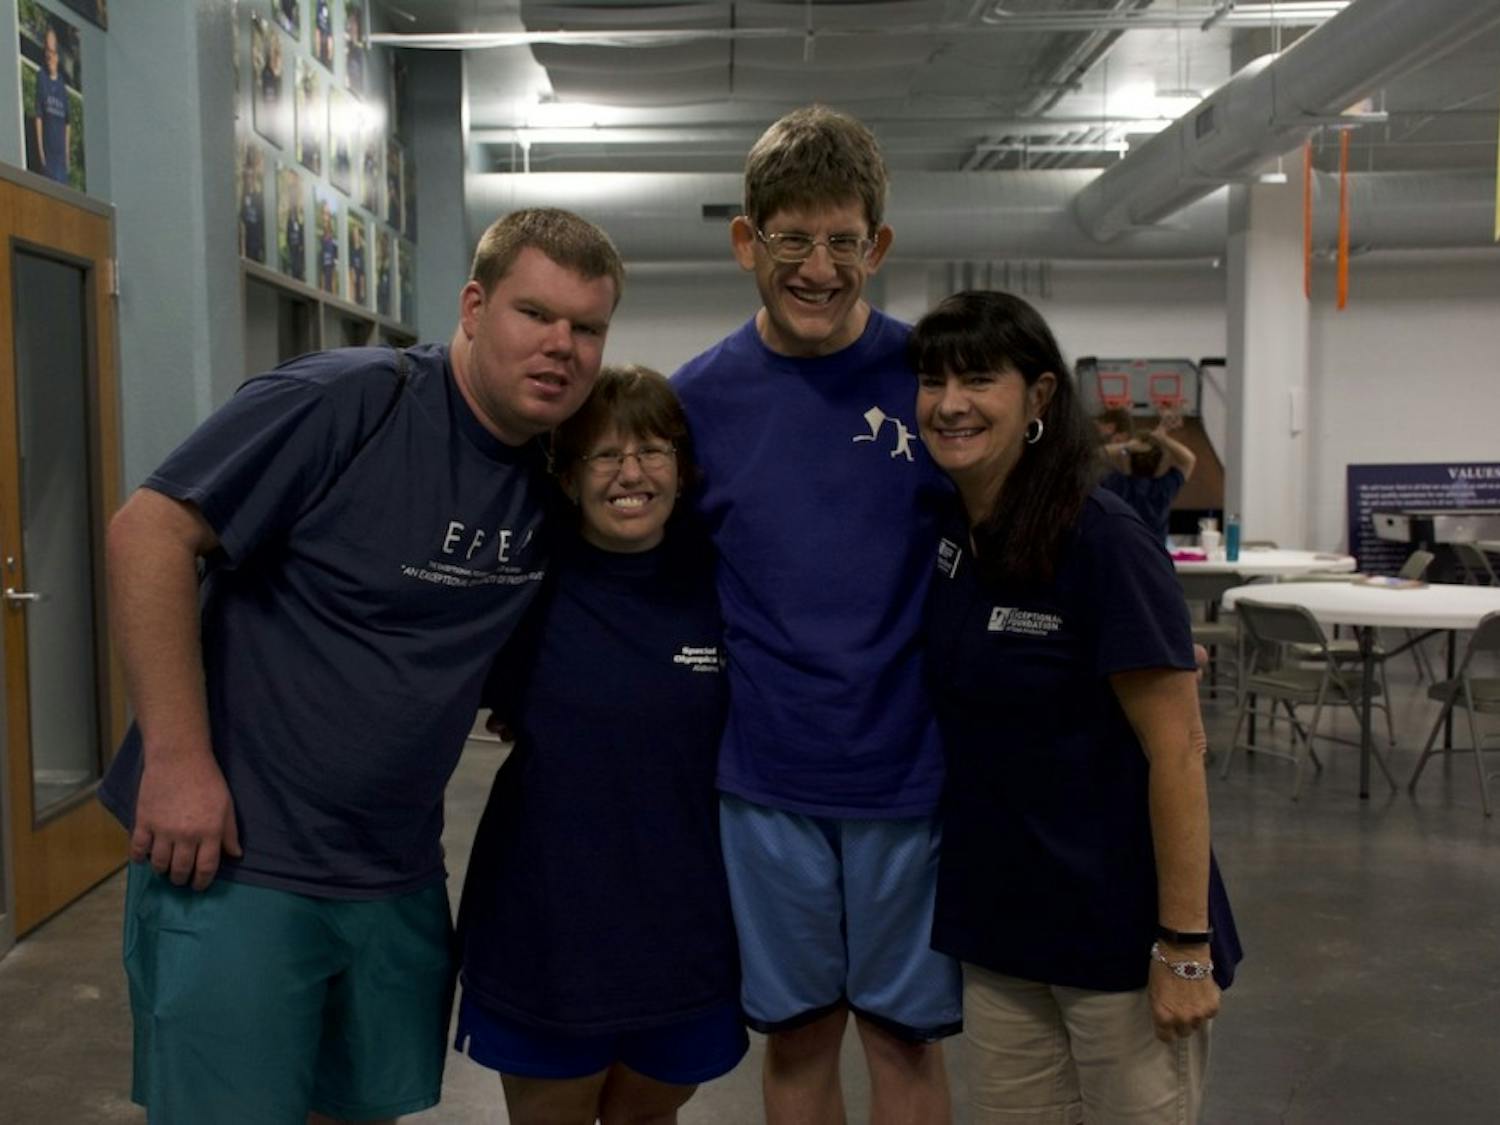 Athletes Dillon Smith, Denise Andreadis and Jeffrey Barns pose with Coach Dana Stewart at the Exceptional Foundation Wednesday, June 20, 2018 in Auburn, Ala.